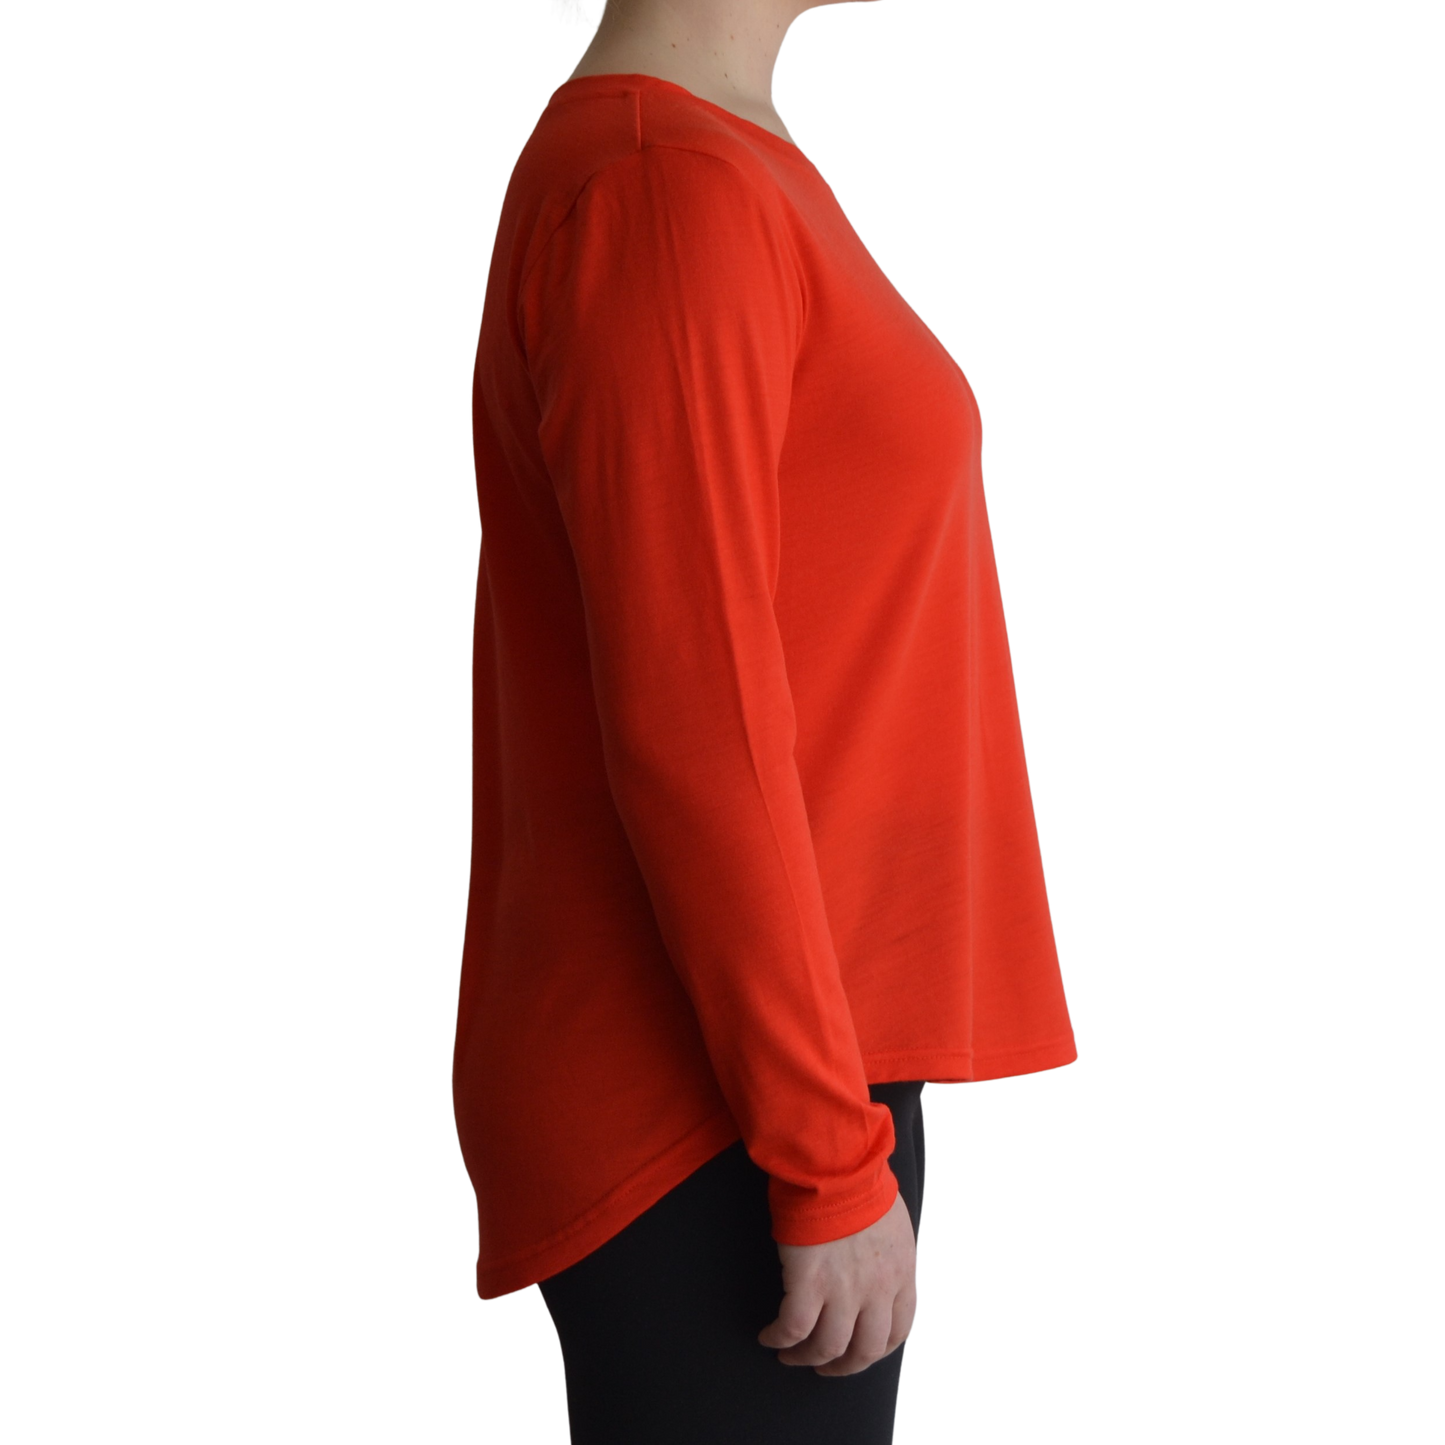 Links long sleeve merino top in mandarin colour, model is standing in profile showing the side view of the shirt with a scooped hemline that drops lower at the back. 